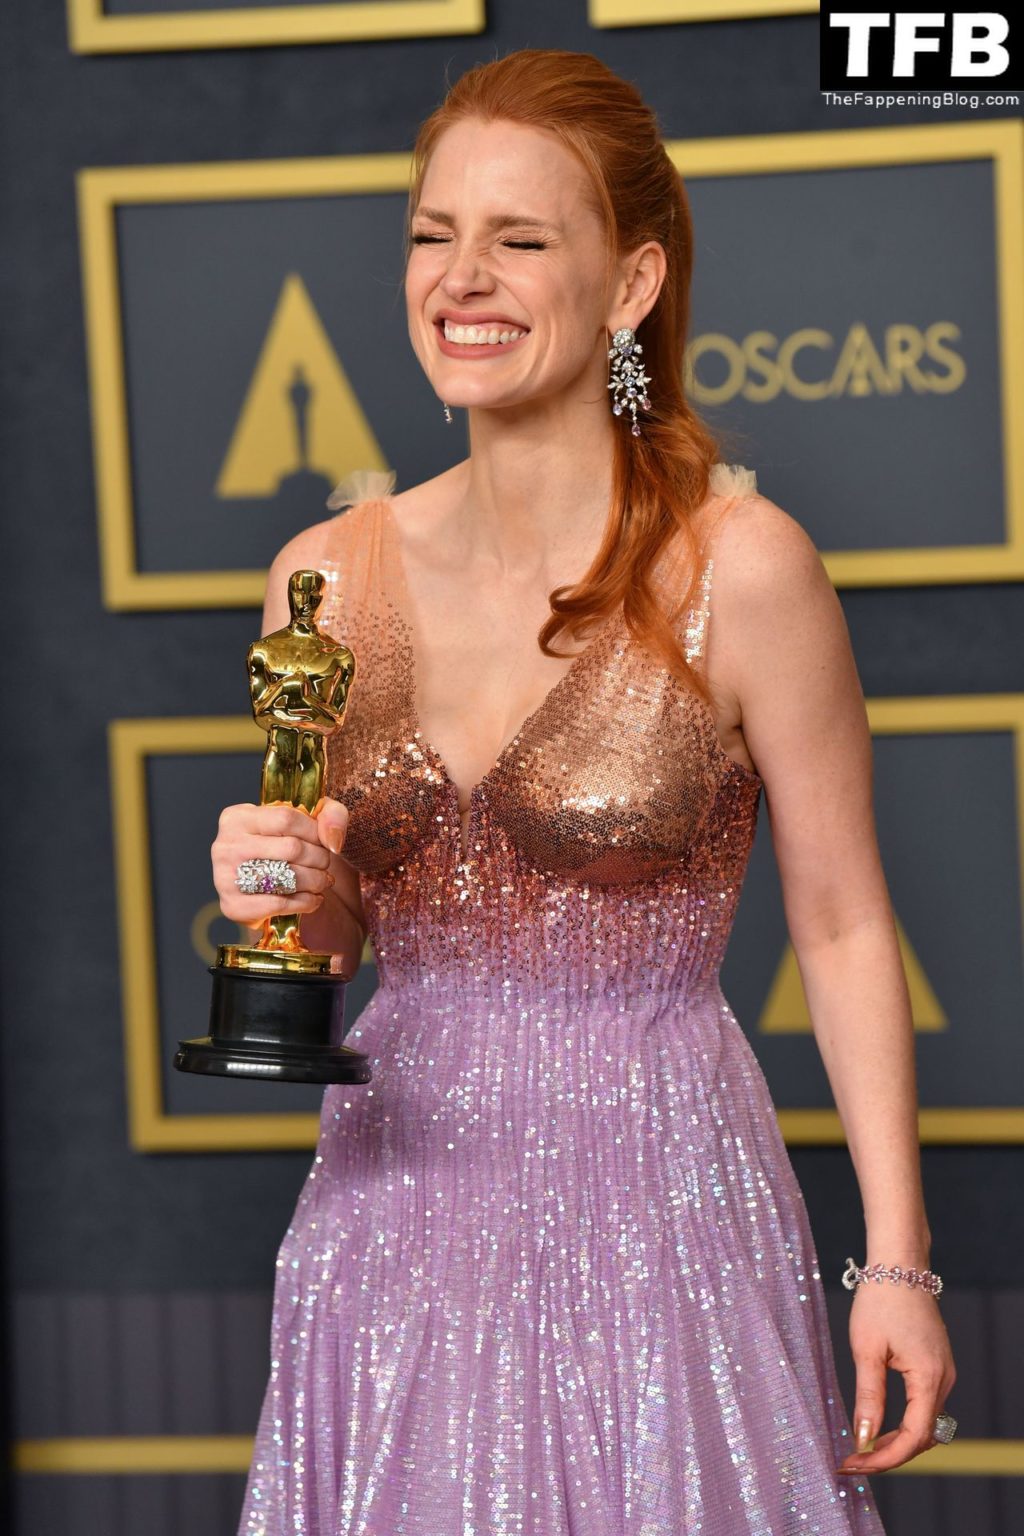 Jessica Chastain Sexy The Fappening Blog 52 1 1024x1536 - Jessica Chastain Poses With Her Oscar at the 94th Academy Awards (150 Photos)